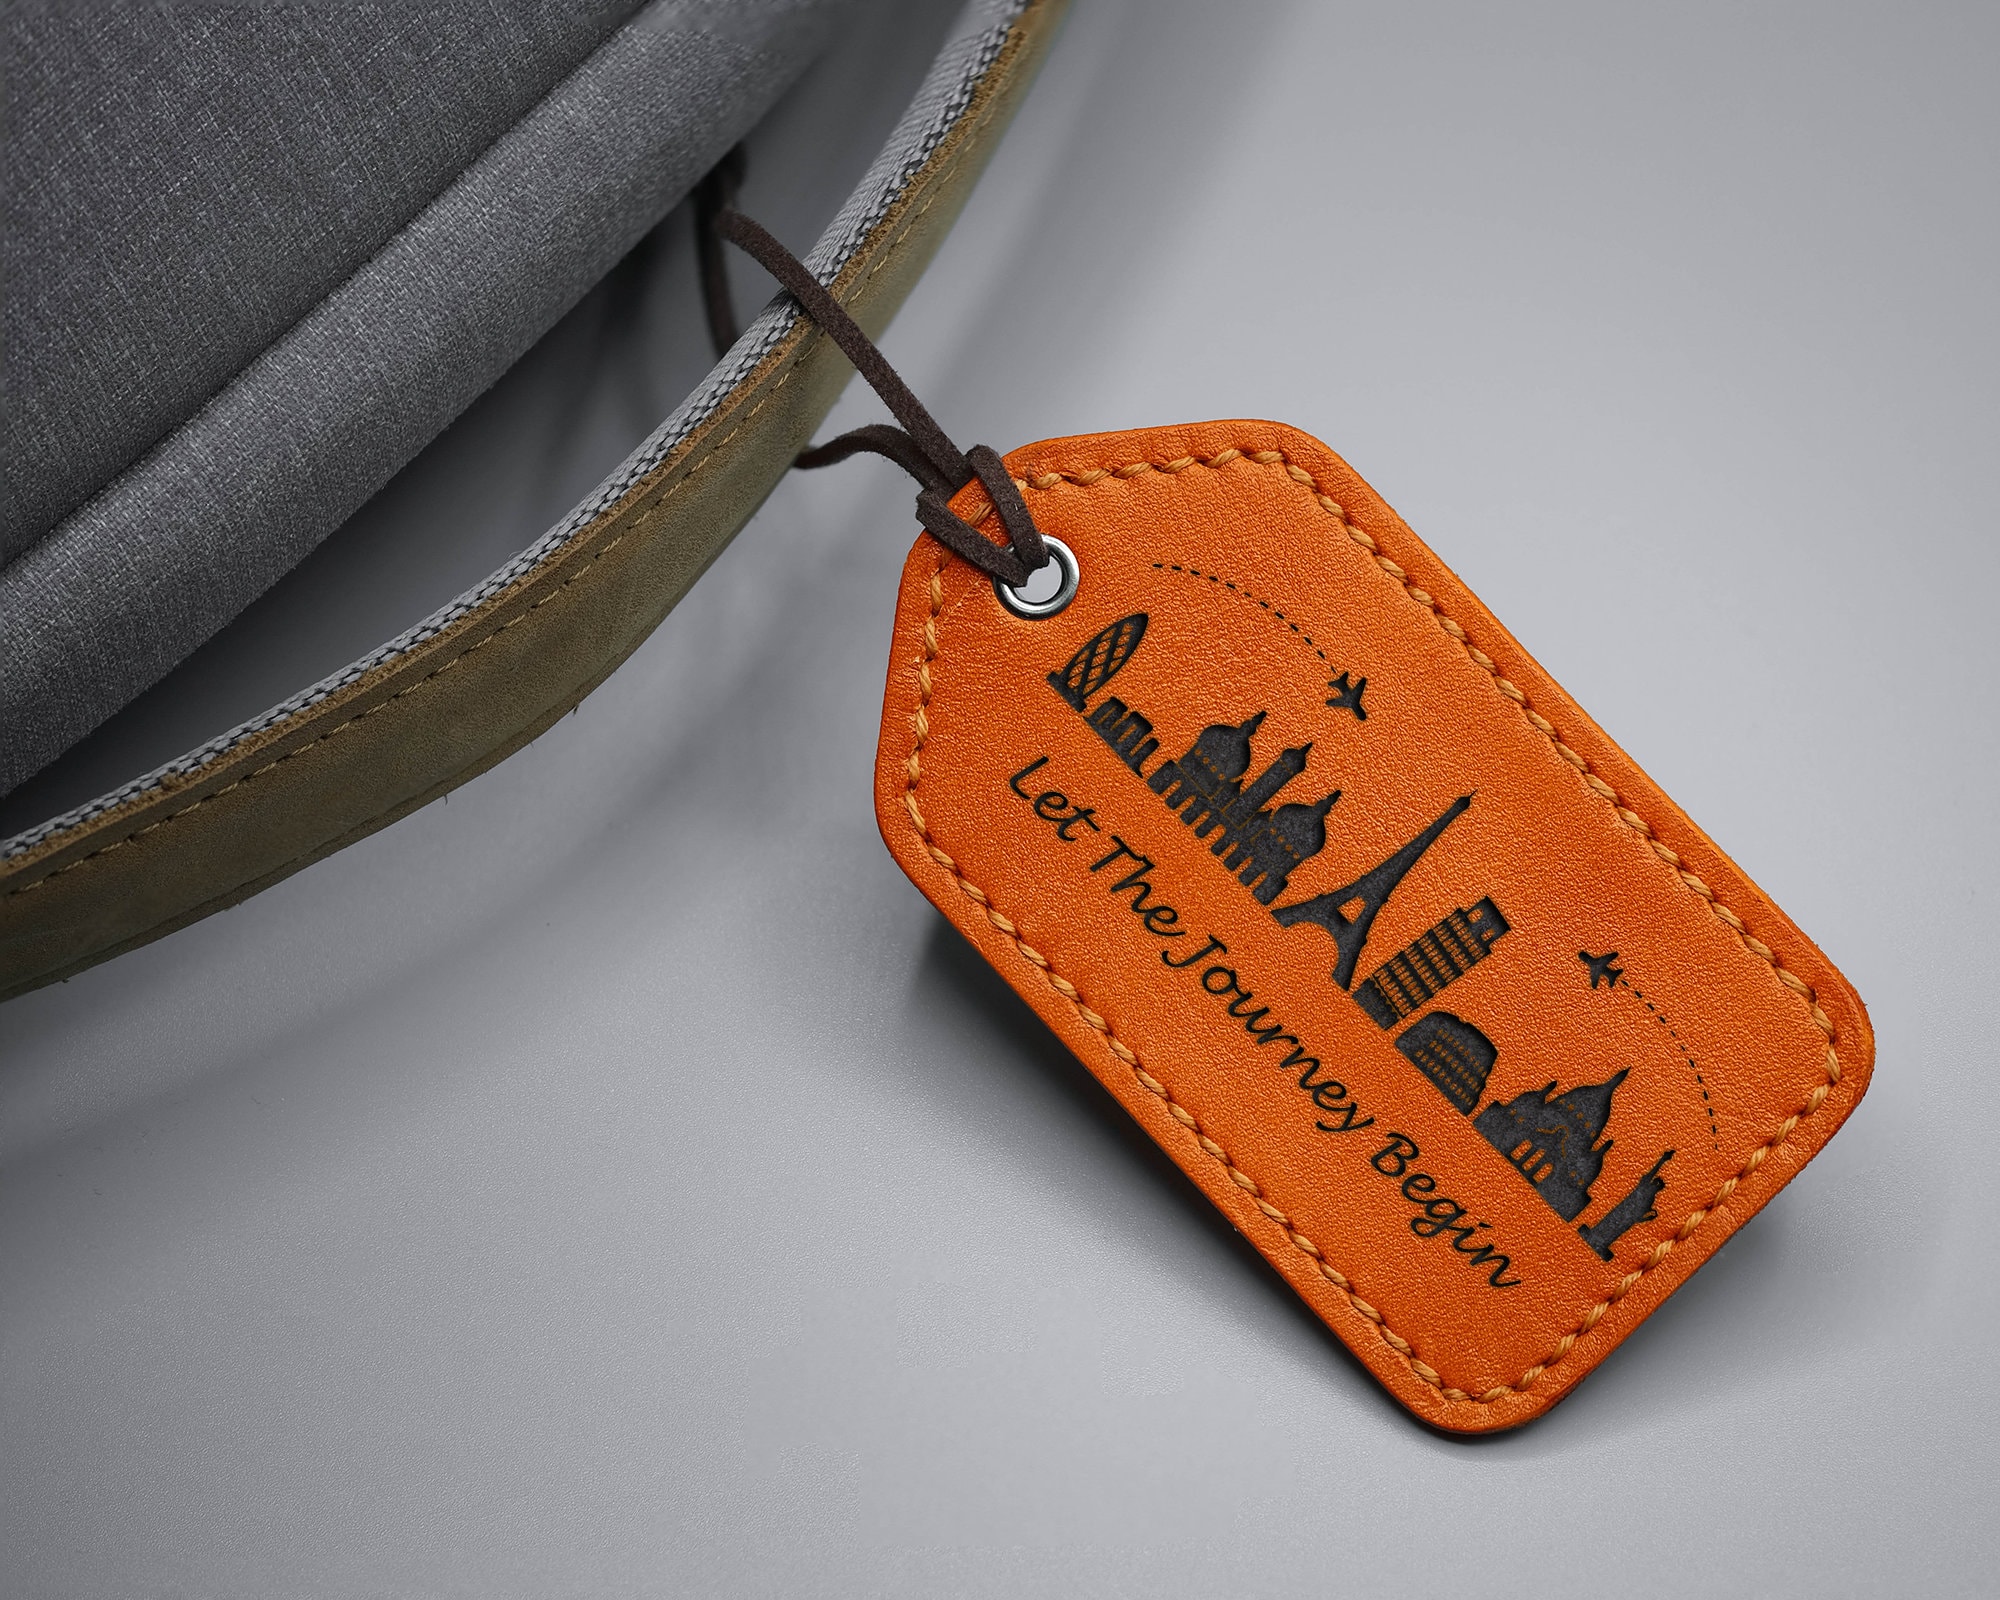 leather-luggage-tag-luggage-tags-personalized-birthday-gift-etsy